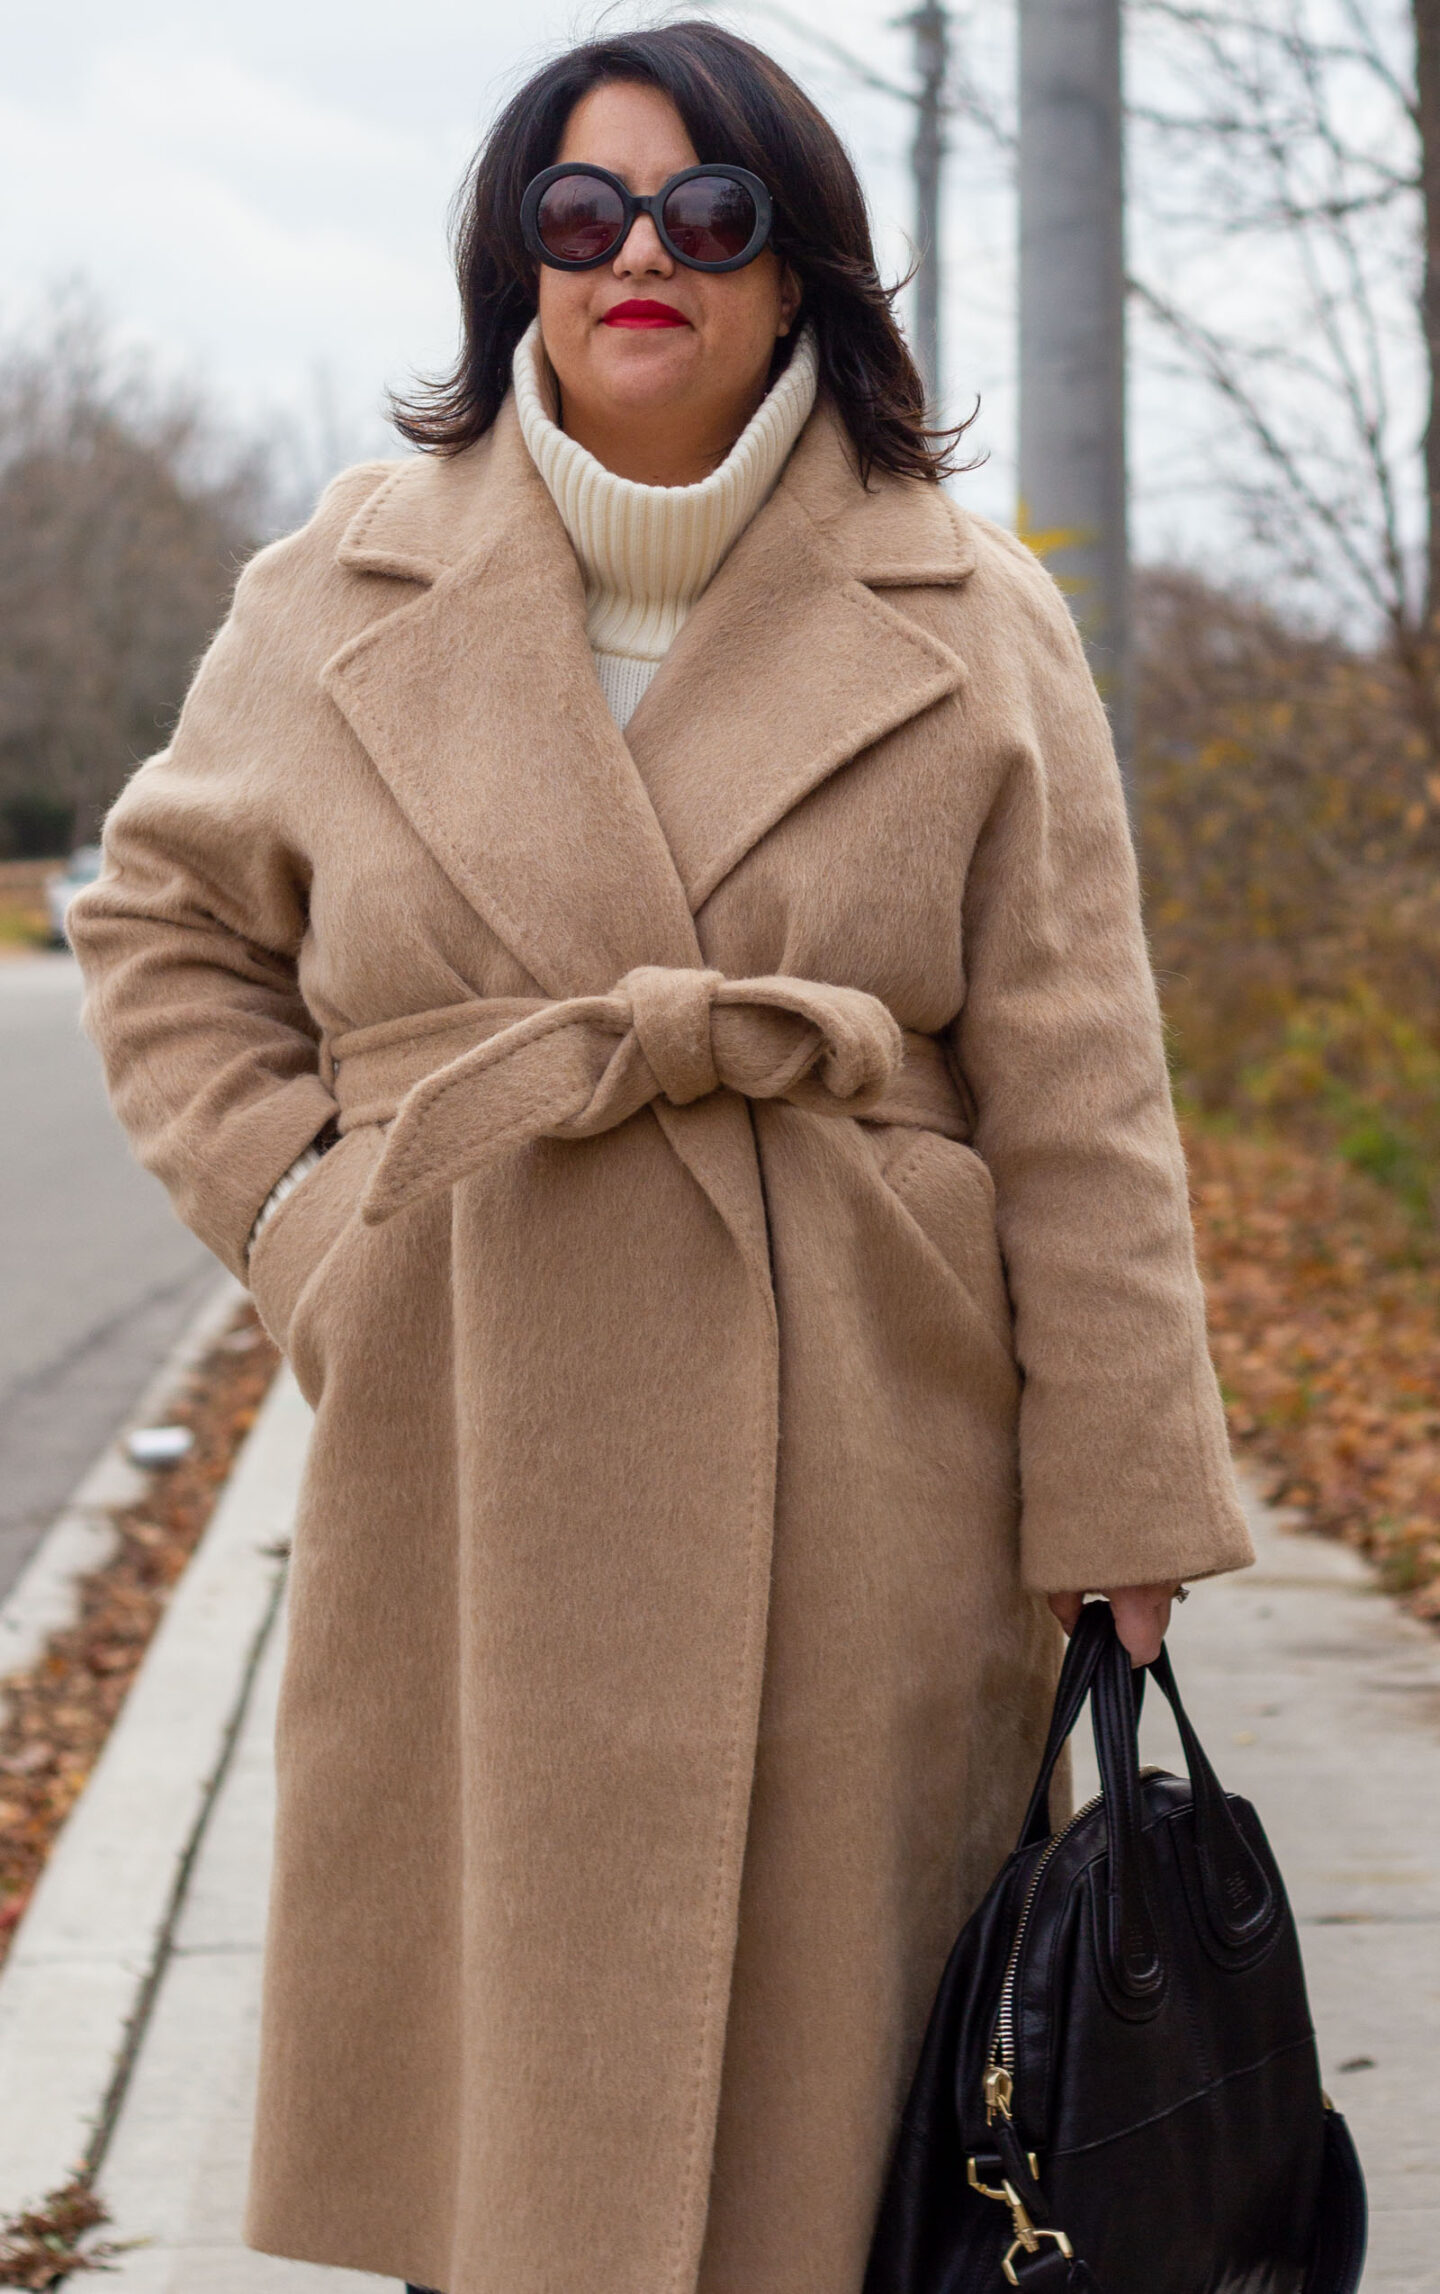 wrap coat outfit